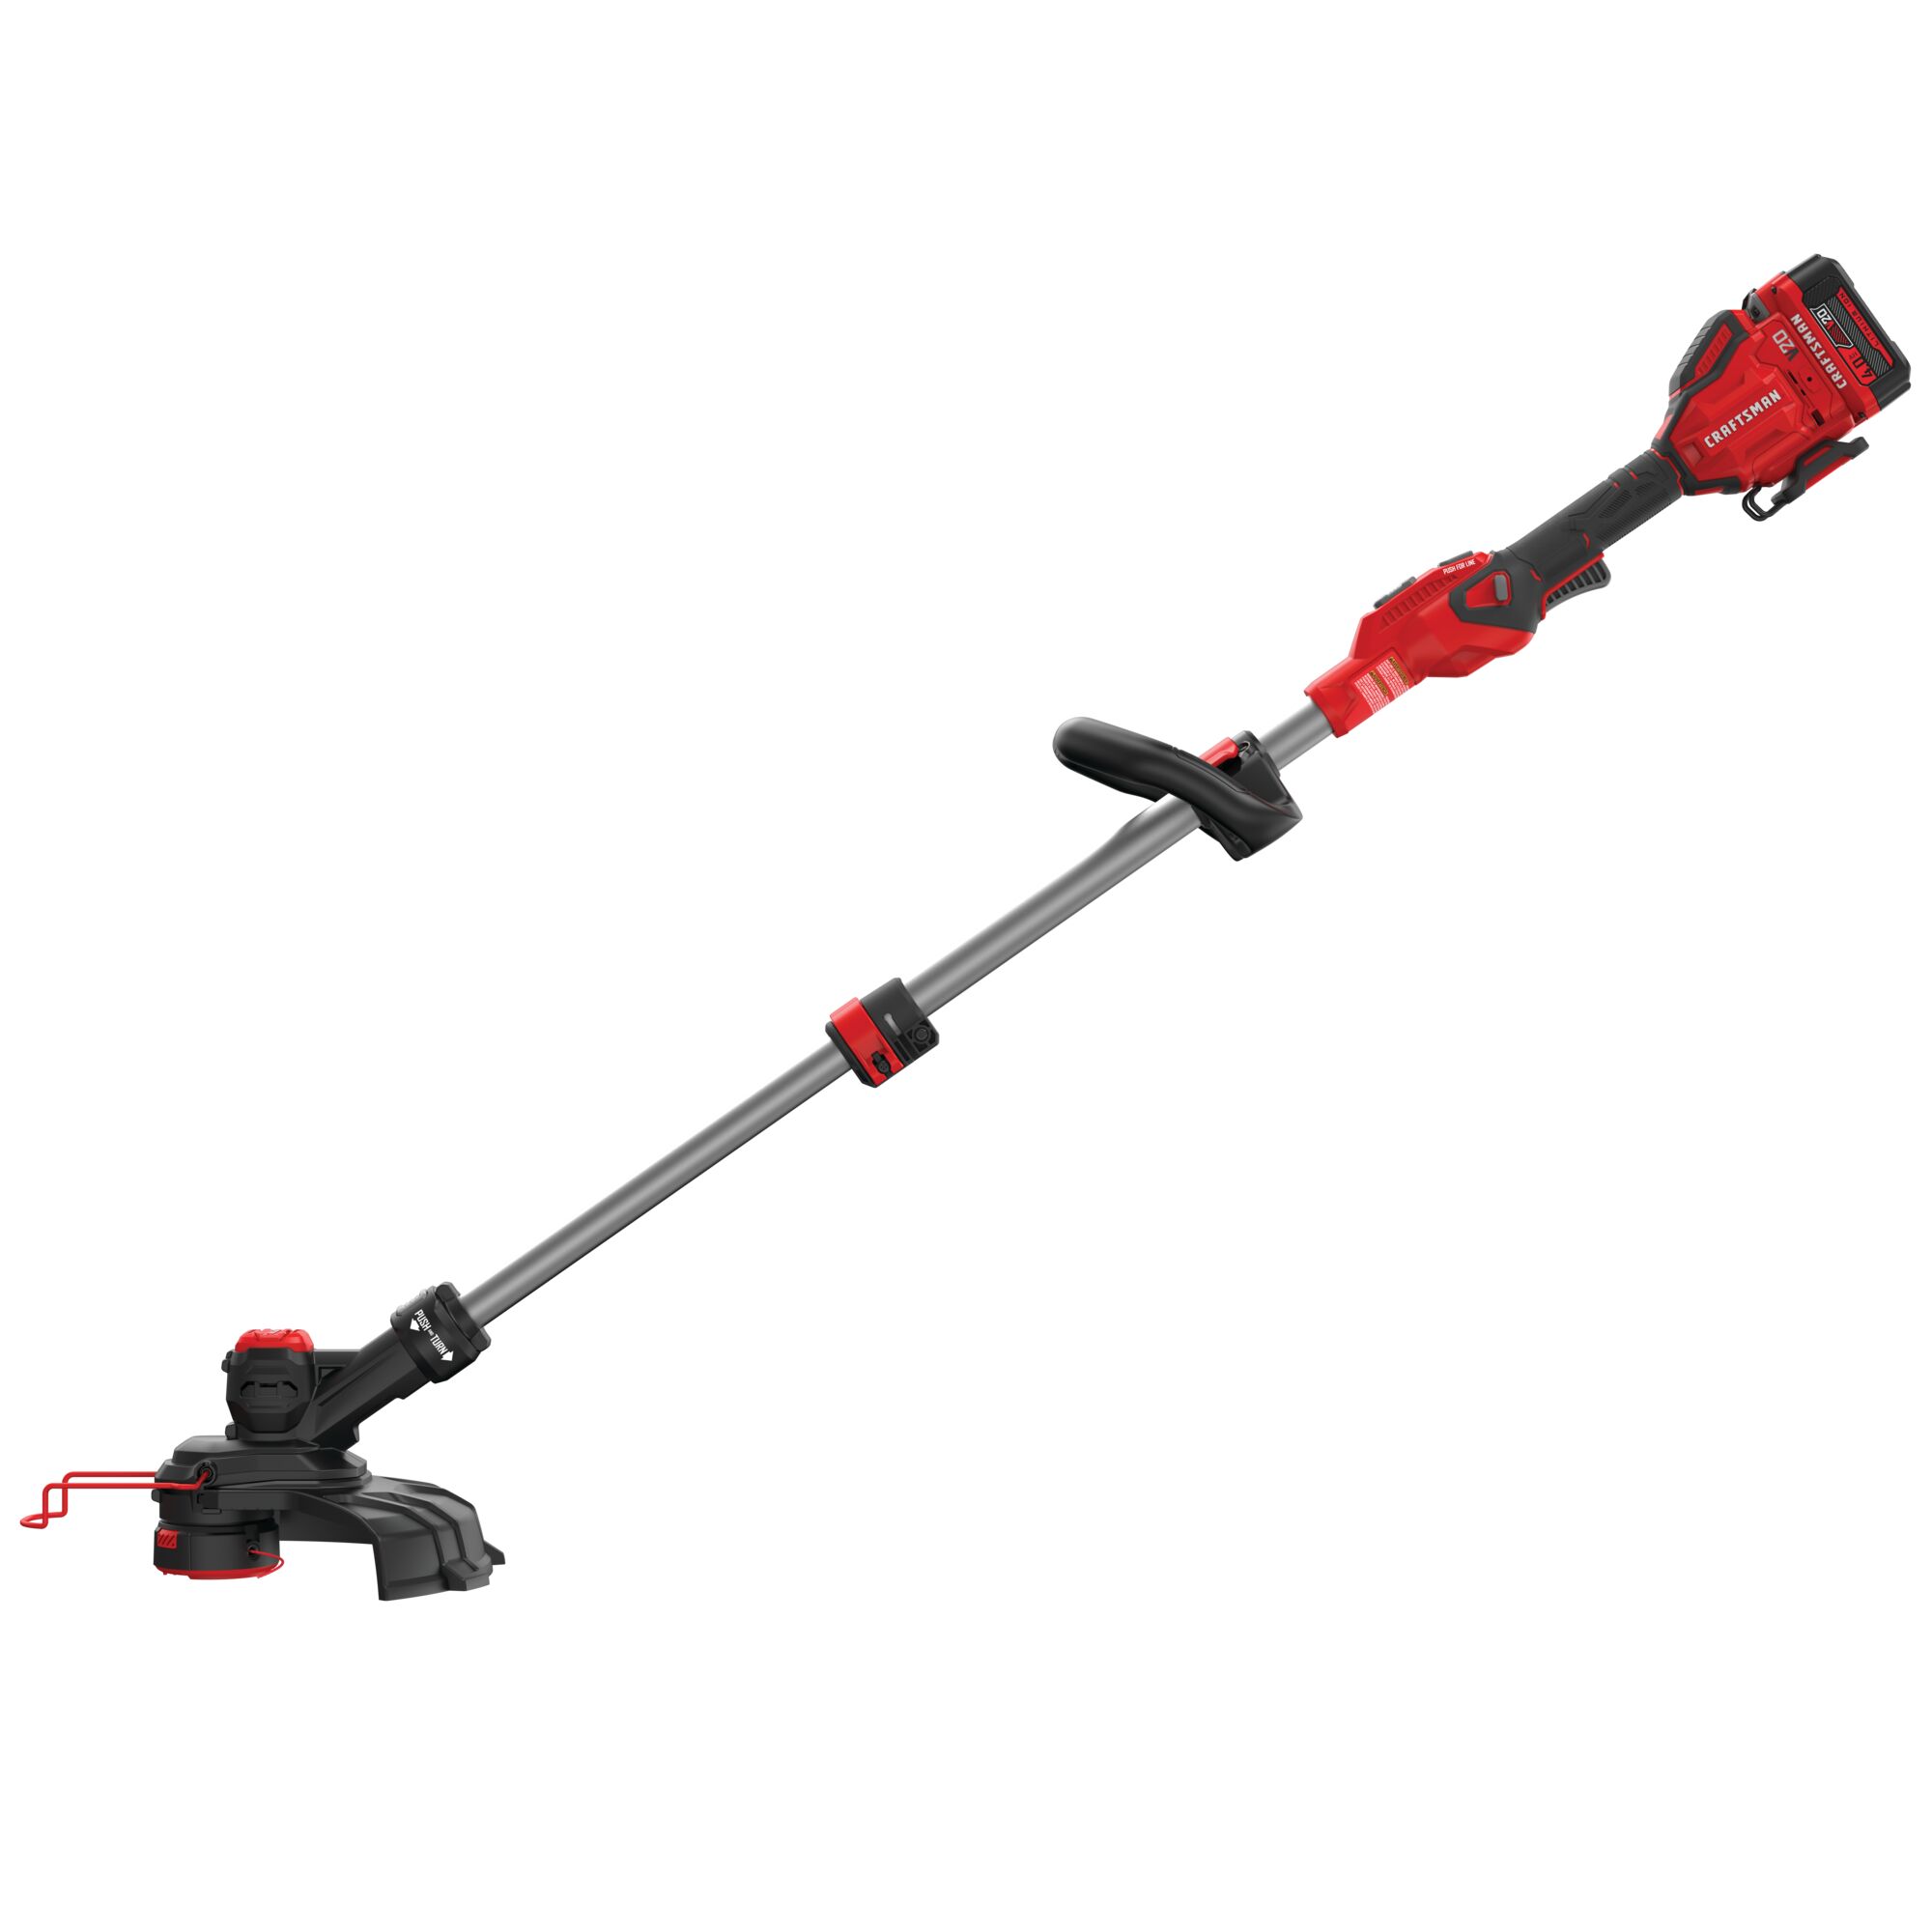 20 volt weedwacker 13 inch cordless string trimmer and edger with push button feed kit.